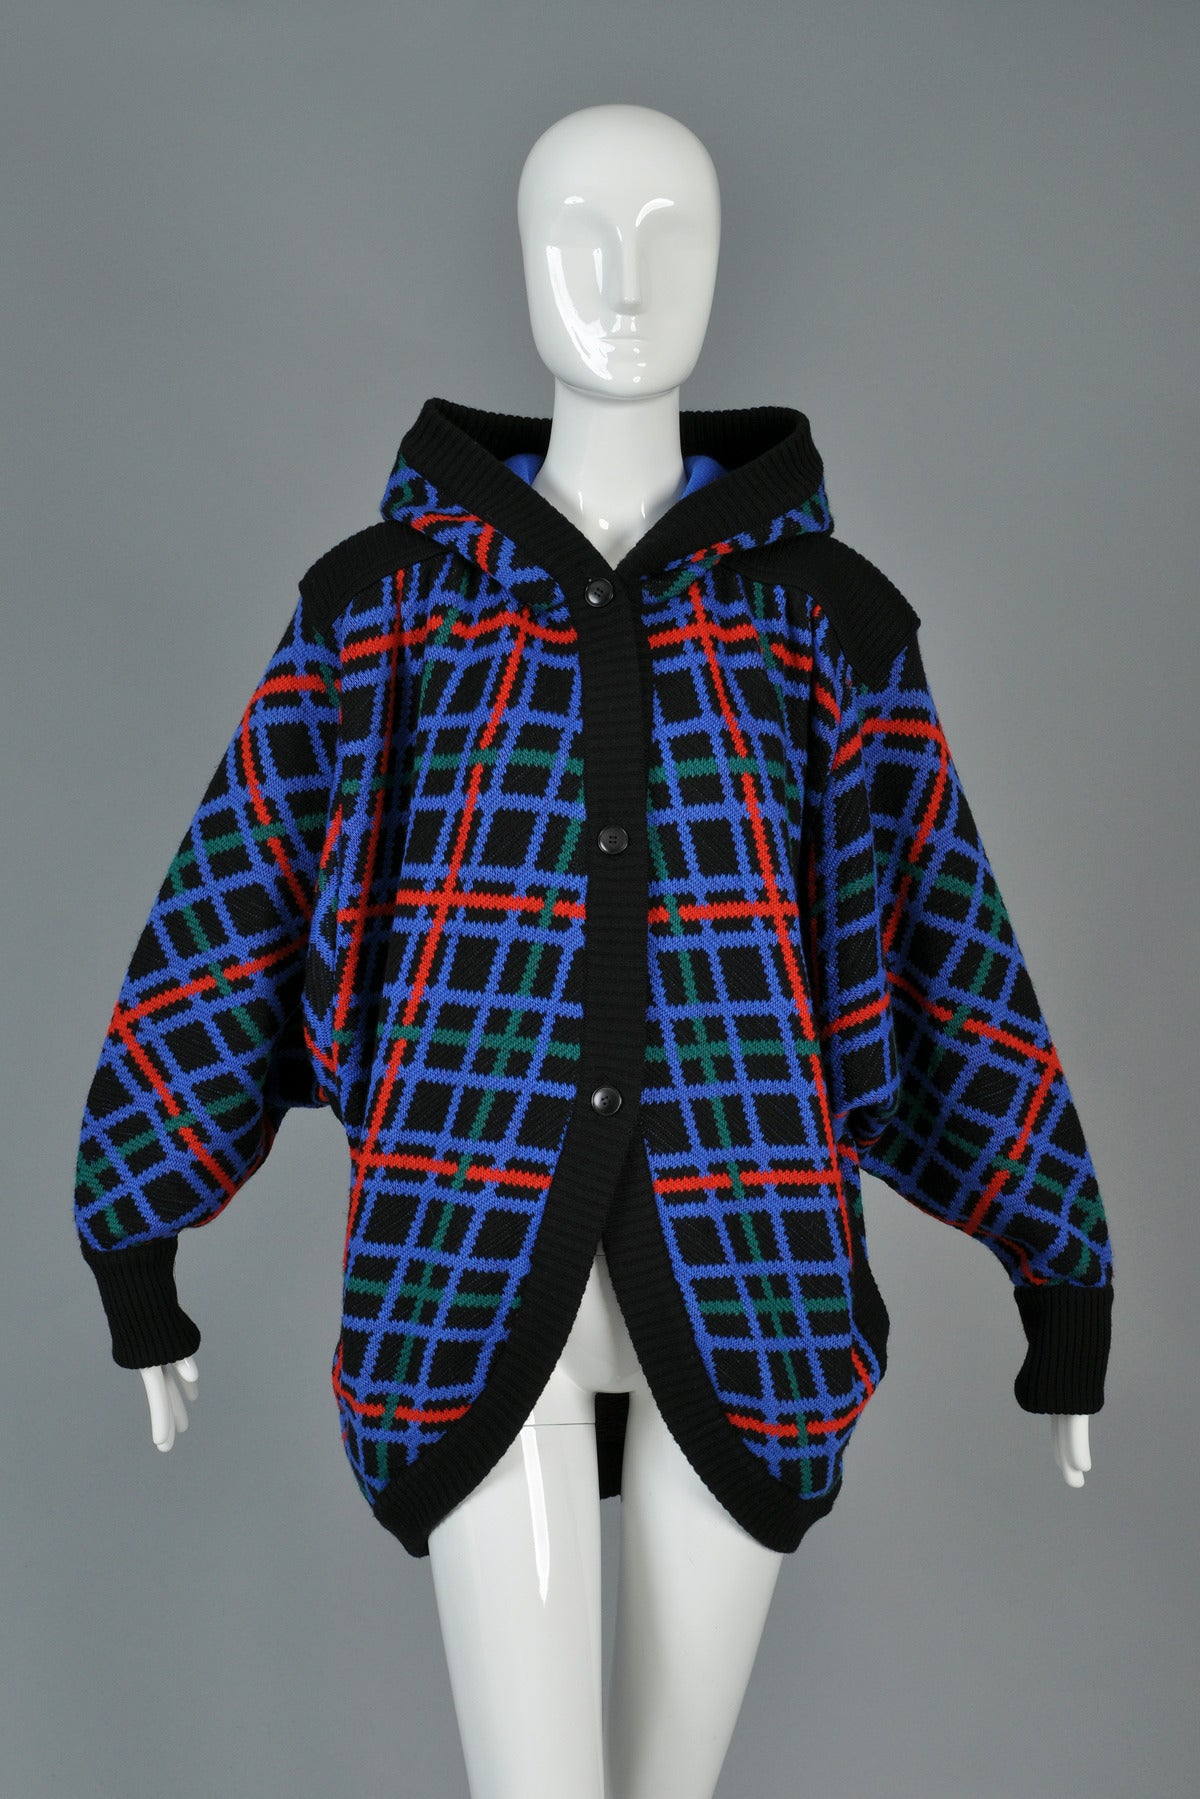 Super awesome 1980s vintage Yves Saint Laurent plaid knit cocoon jacket. Super rare find - so wearable, comfy + modern! Button front with cutaway cocoon hem + hood. Super heavy and cozy - could definitely work as a warm coat with a few layers